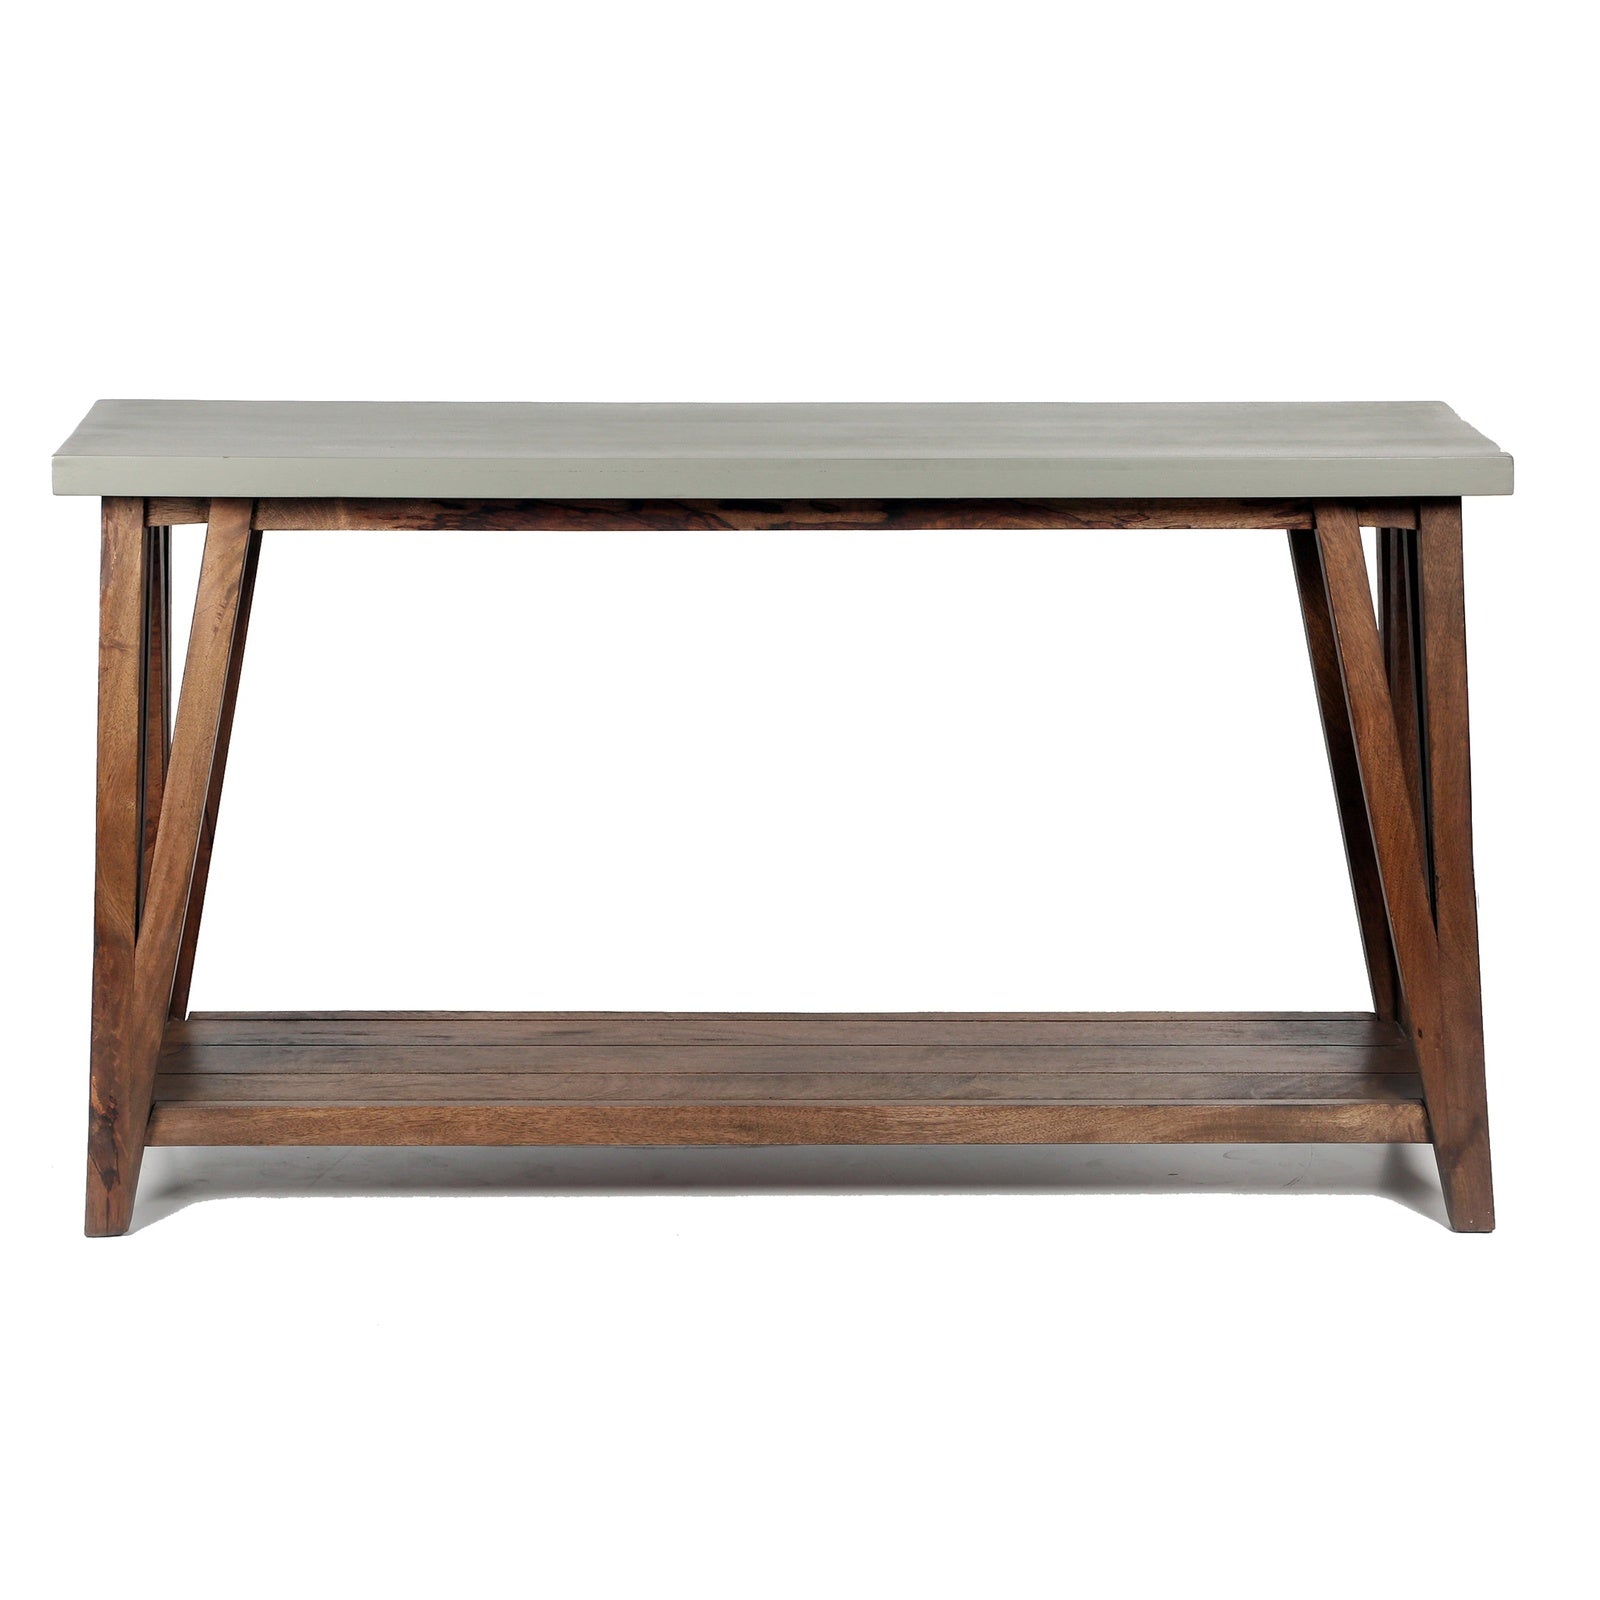 Brookside Wood with Concrete-Coating Console/Media Table - Pier 1